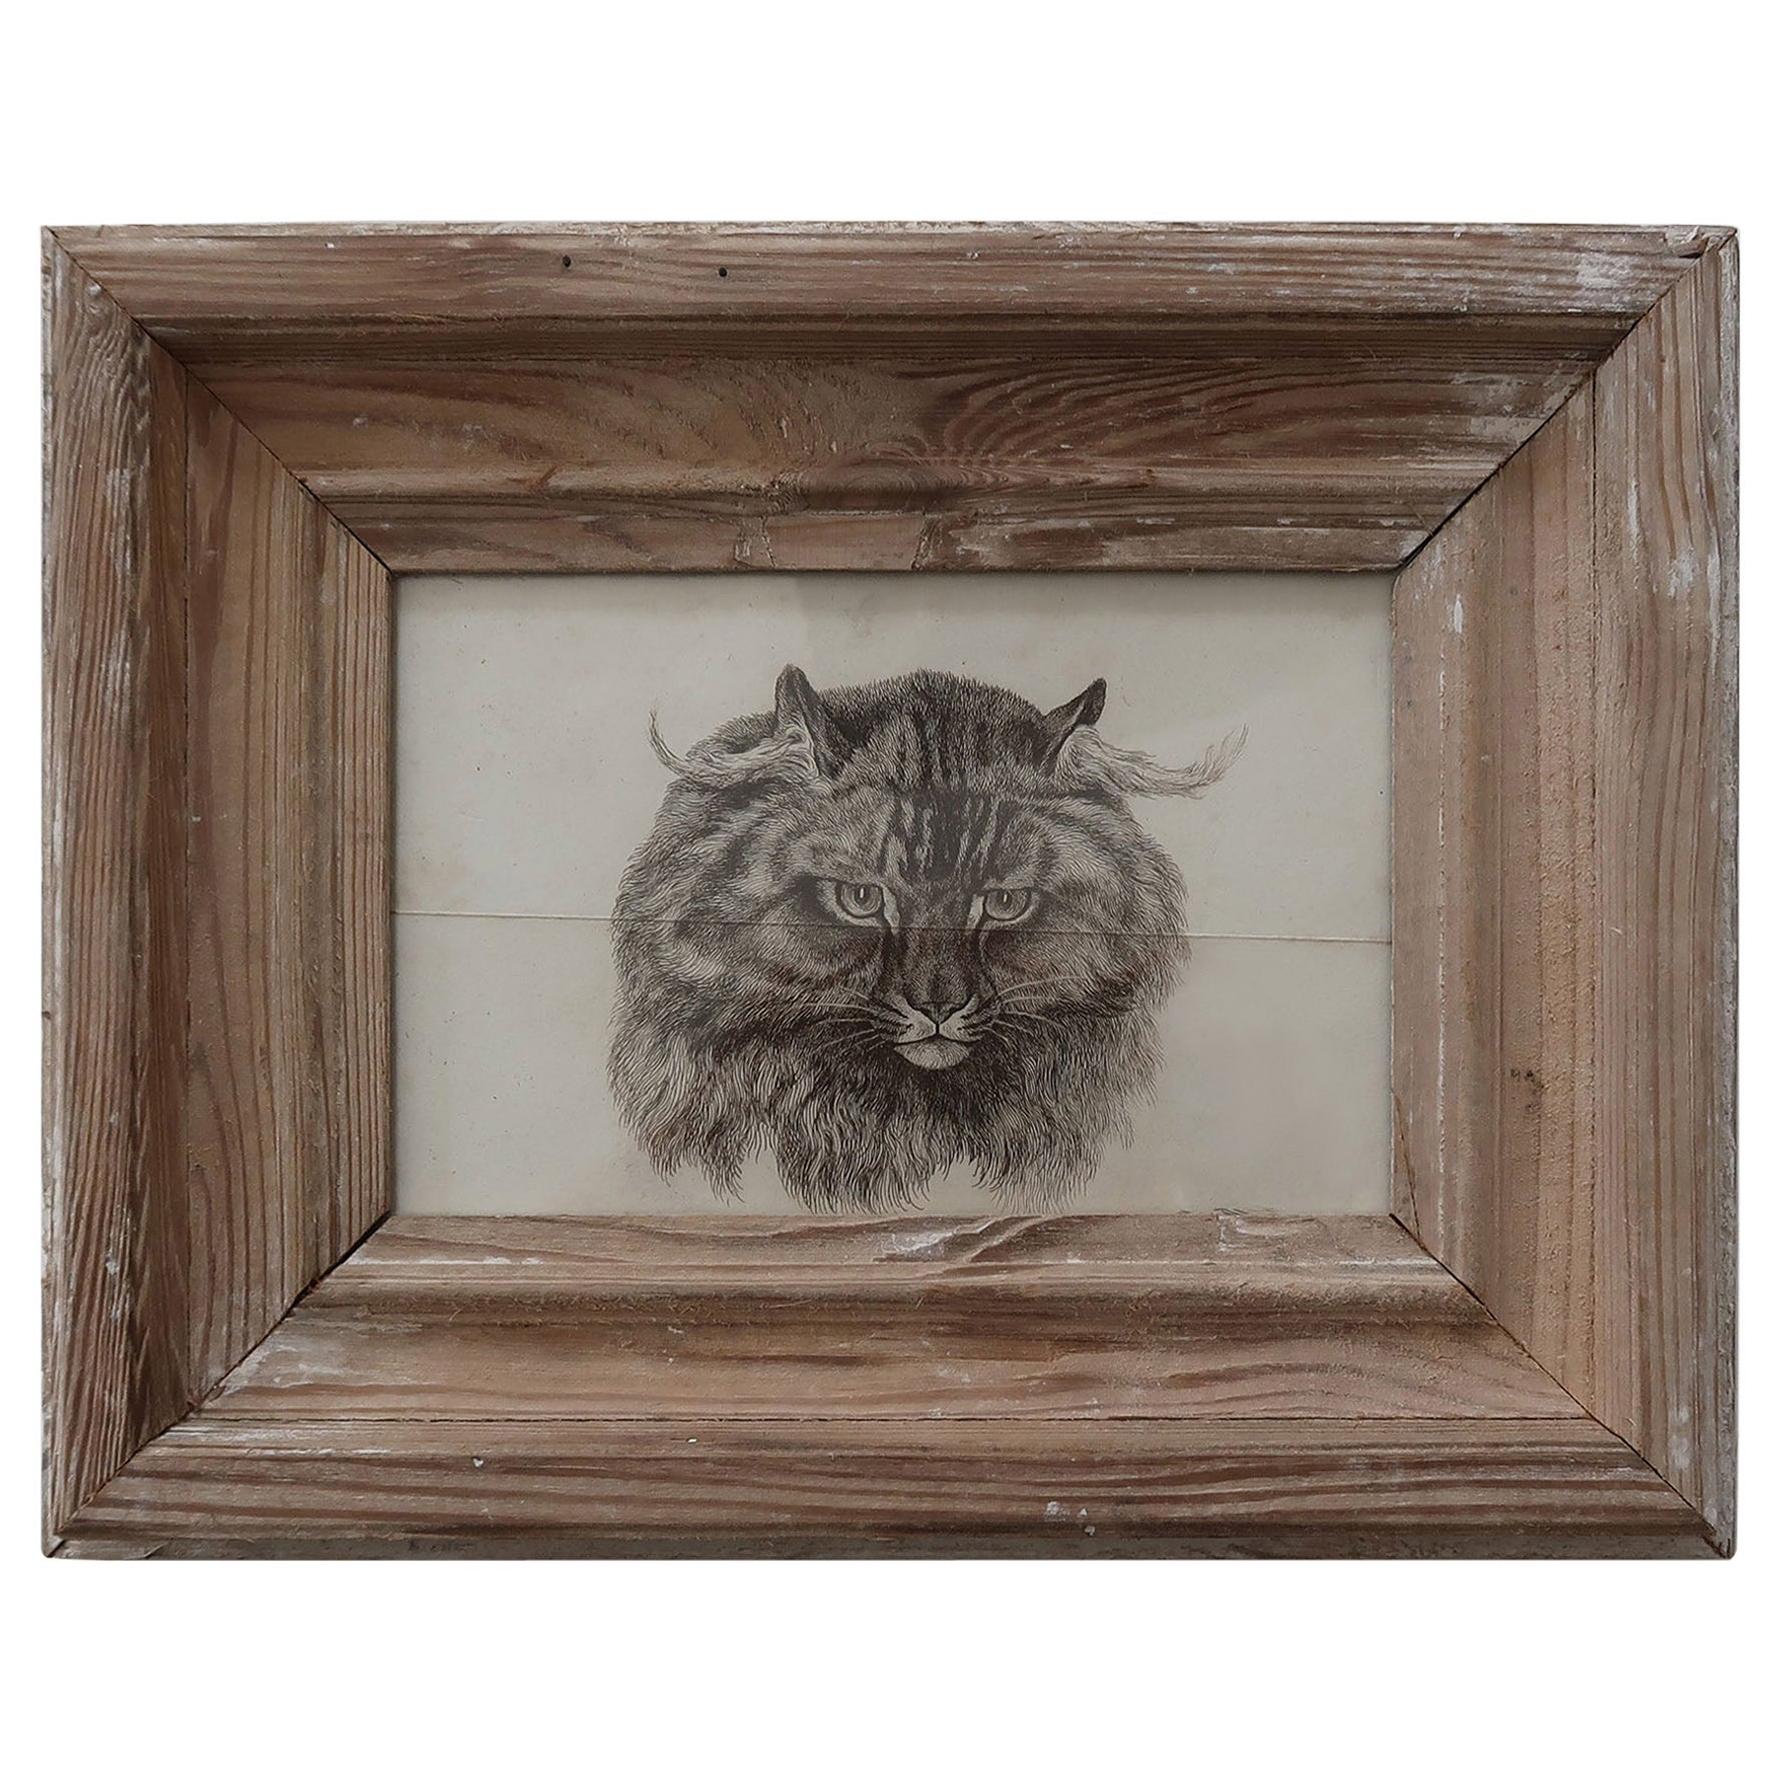 Original Antique Print of a Cat After Landseer, Early 19th Century